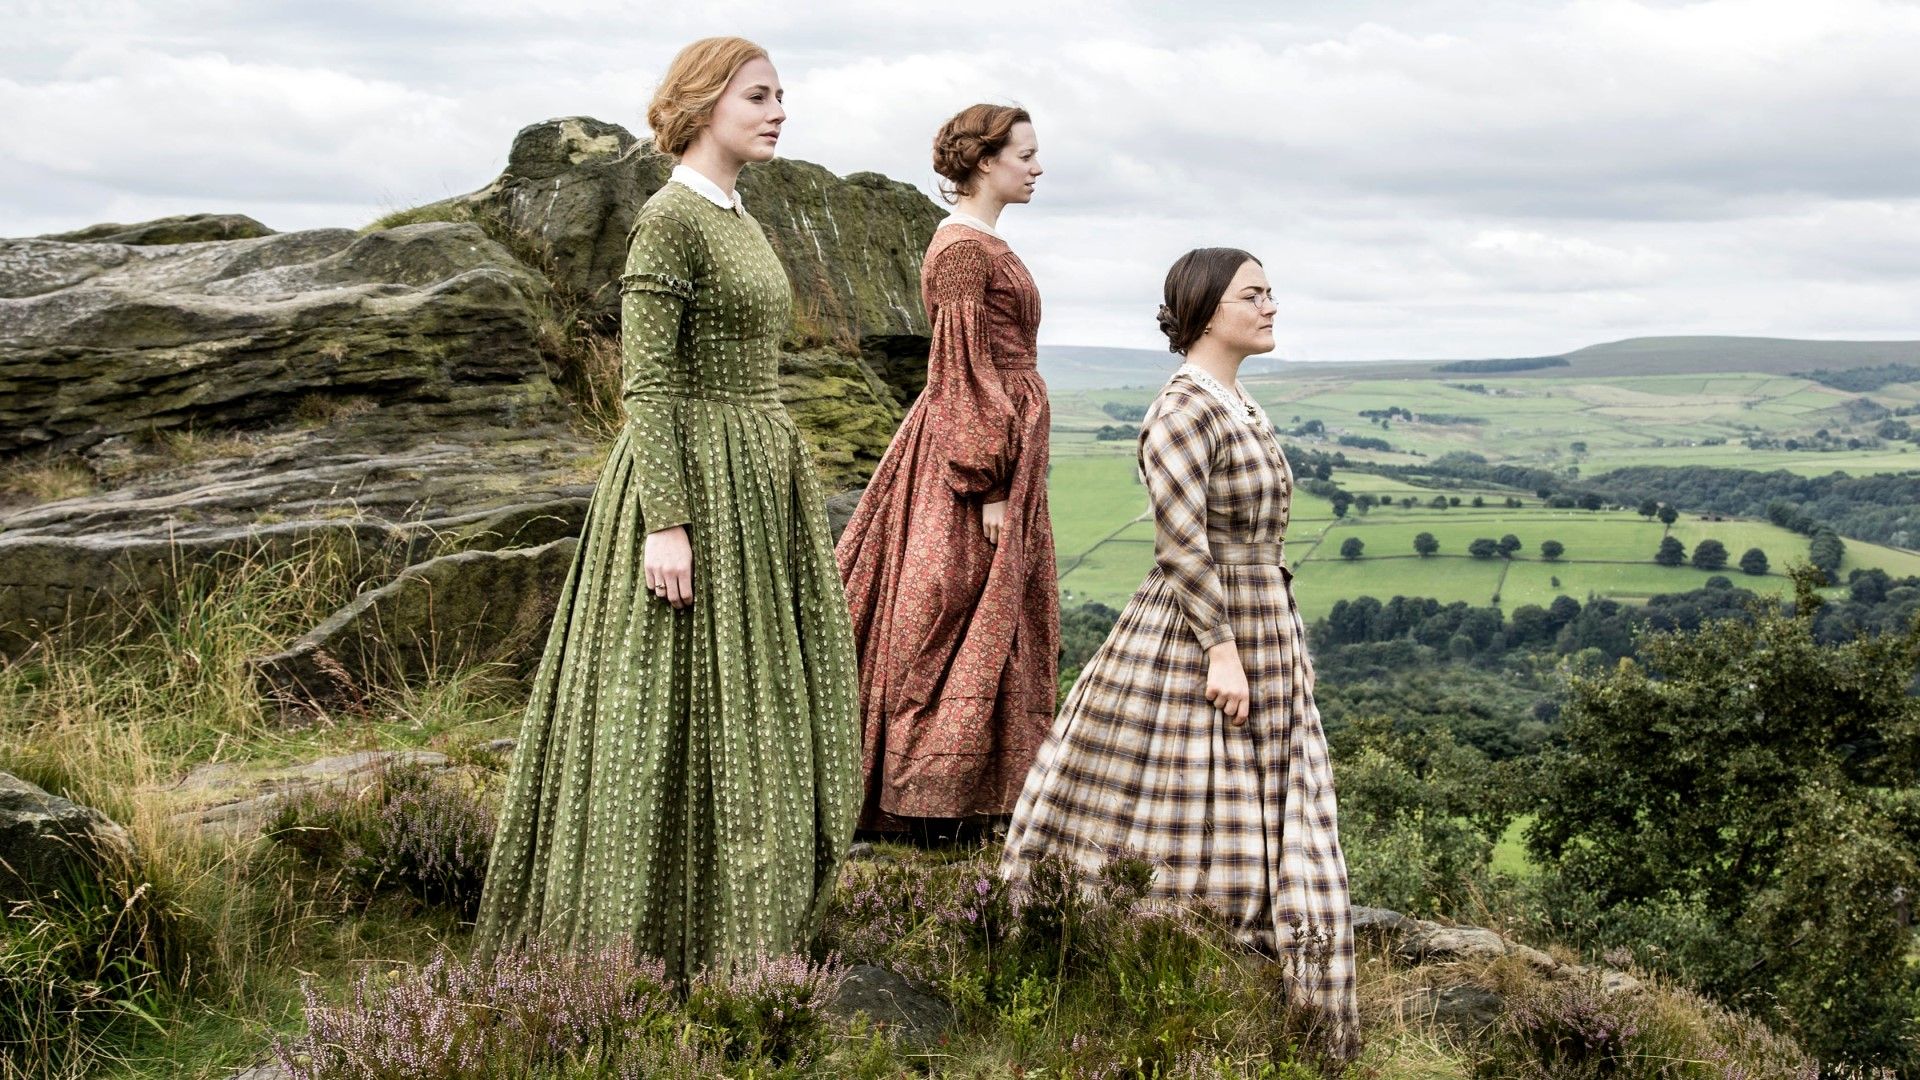 Walk Invisible: The Brontë Sisters background